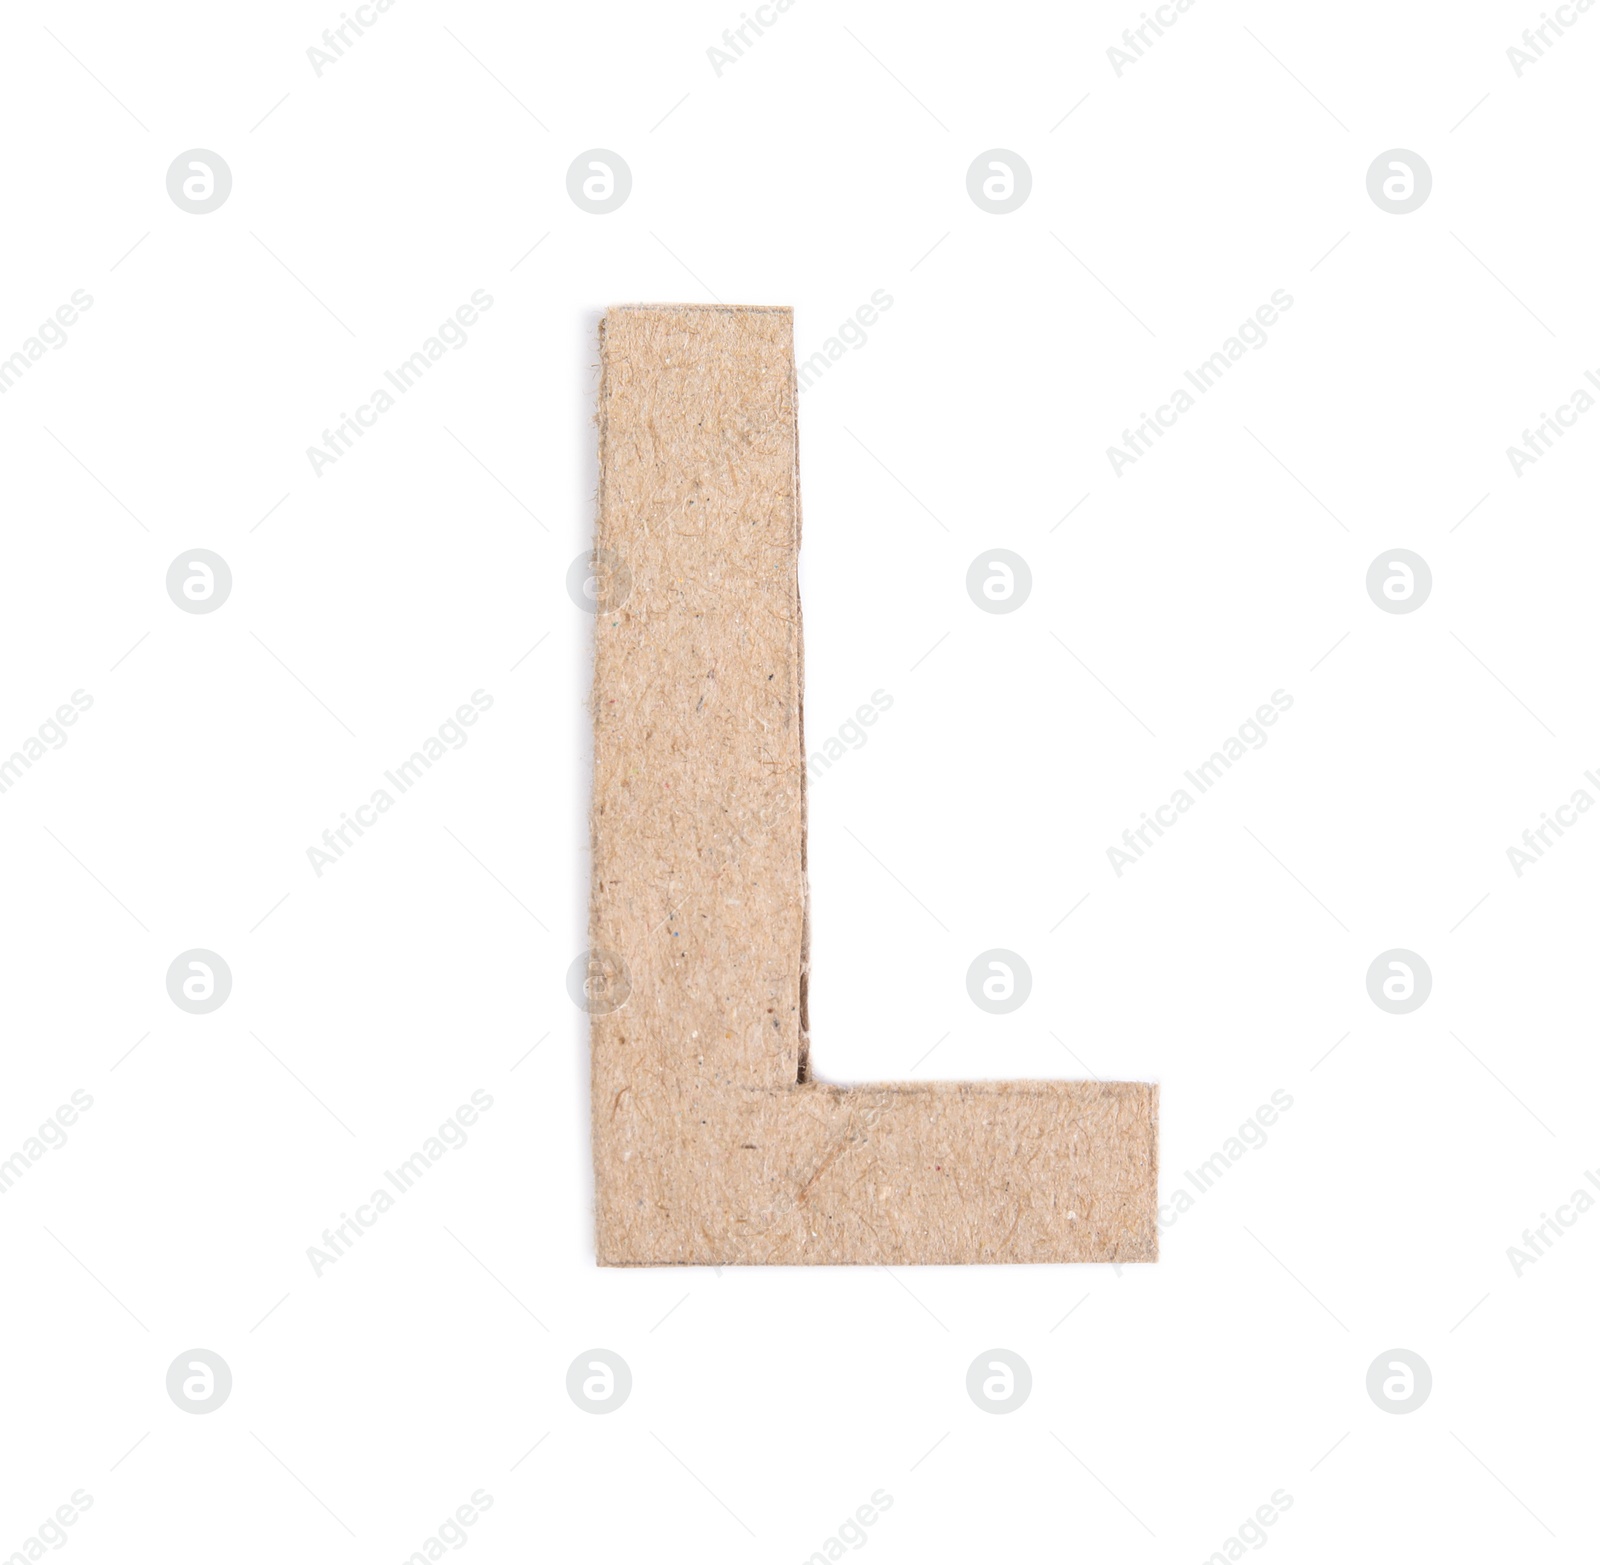 Photo of Letter L made of cardboard isolated on white